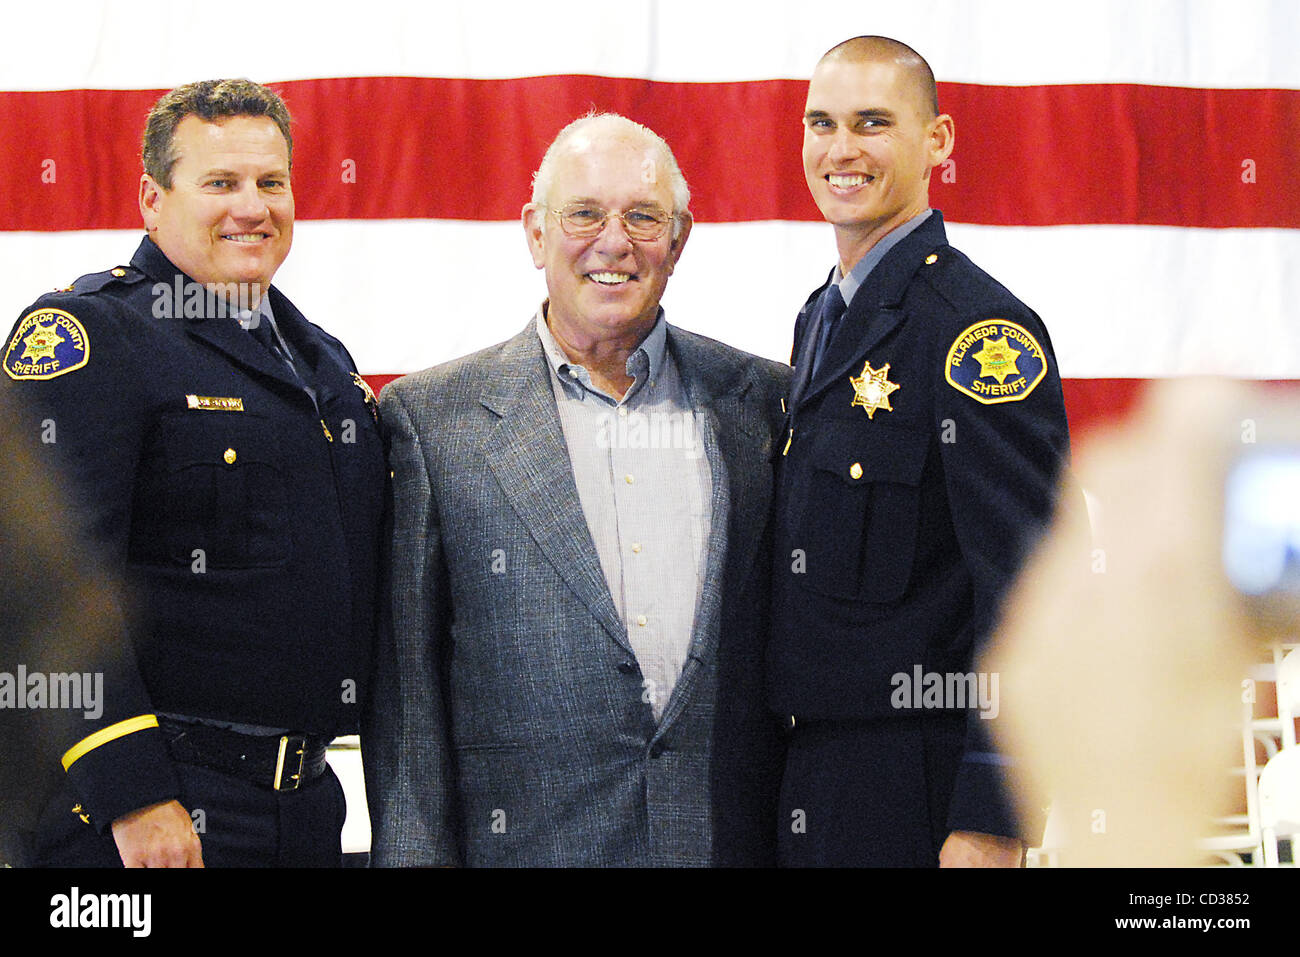 Geoffrey Ball, right, poses for a photo with his biological uncle Dean Stavert, far left, and his biological grandfather Bud Harlan after Ball is sworn in as a member of the Alameda County Sheriff's Department on Friday, April 18, 2008 in a ceremony at the Alameda County Fairgrounds in Pleasanton, C Stock Photo